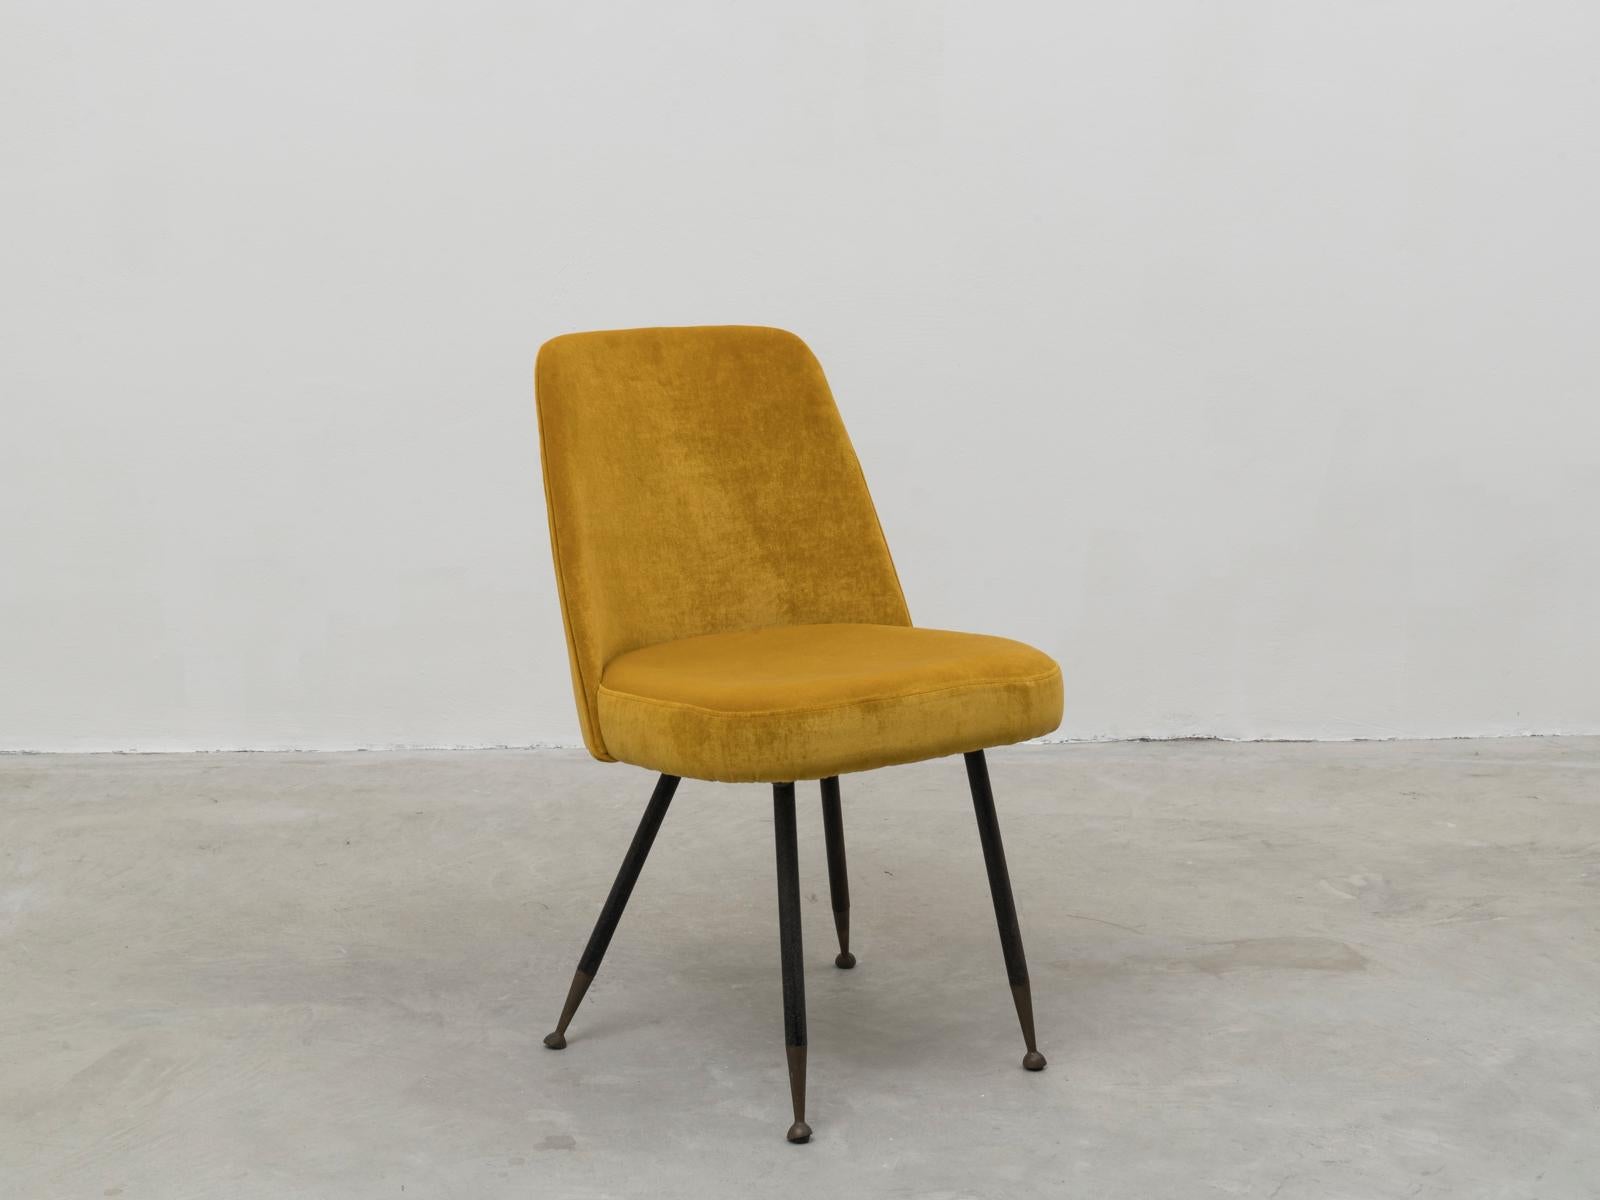 This desk chair was designed in the 1950s by Gastone Rinaldi for Rima, the manufacturer he founded in Brescia. 
Rinaldi was an extremely talented designer, that has designed a great number of seats, and now his work is widely appreciated among